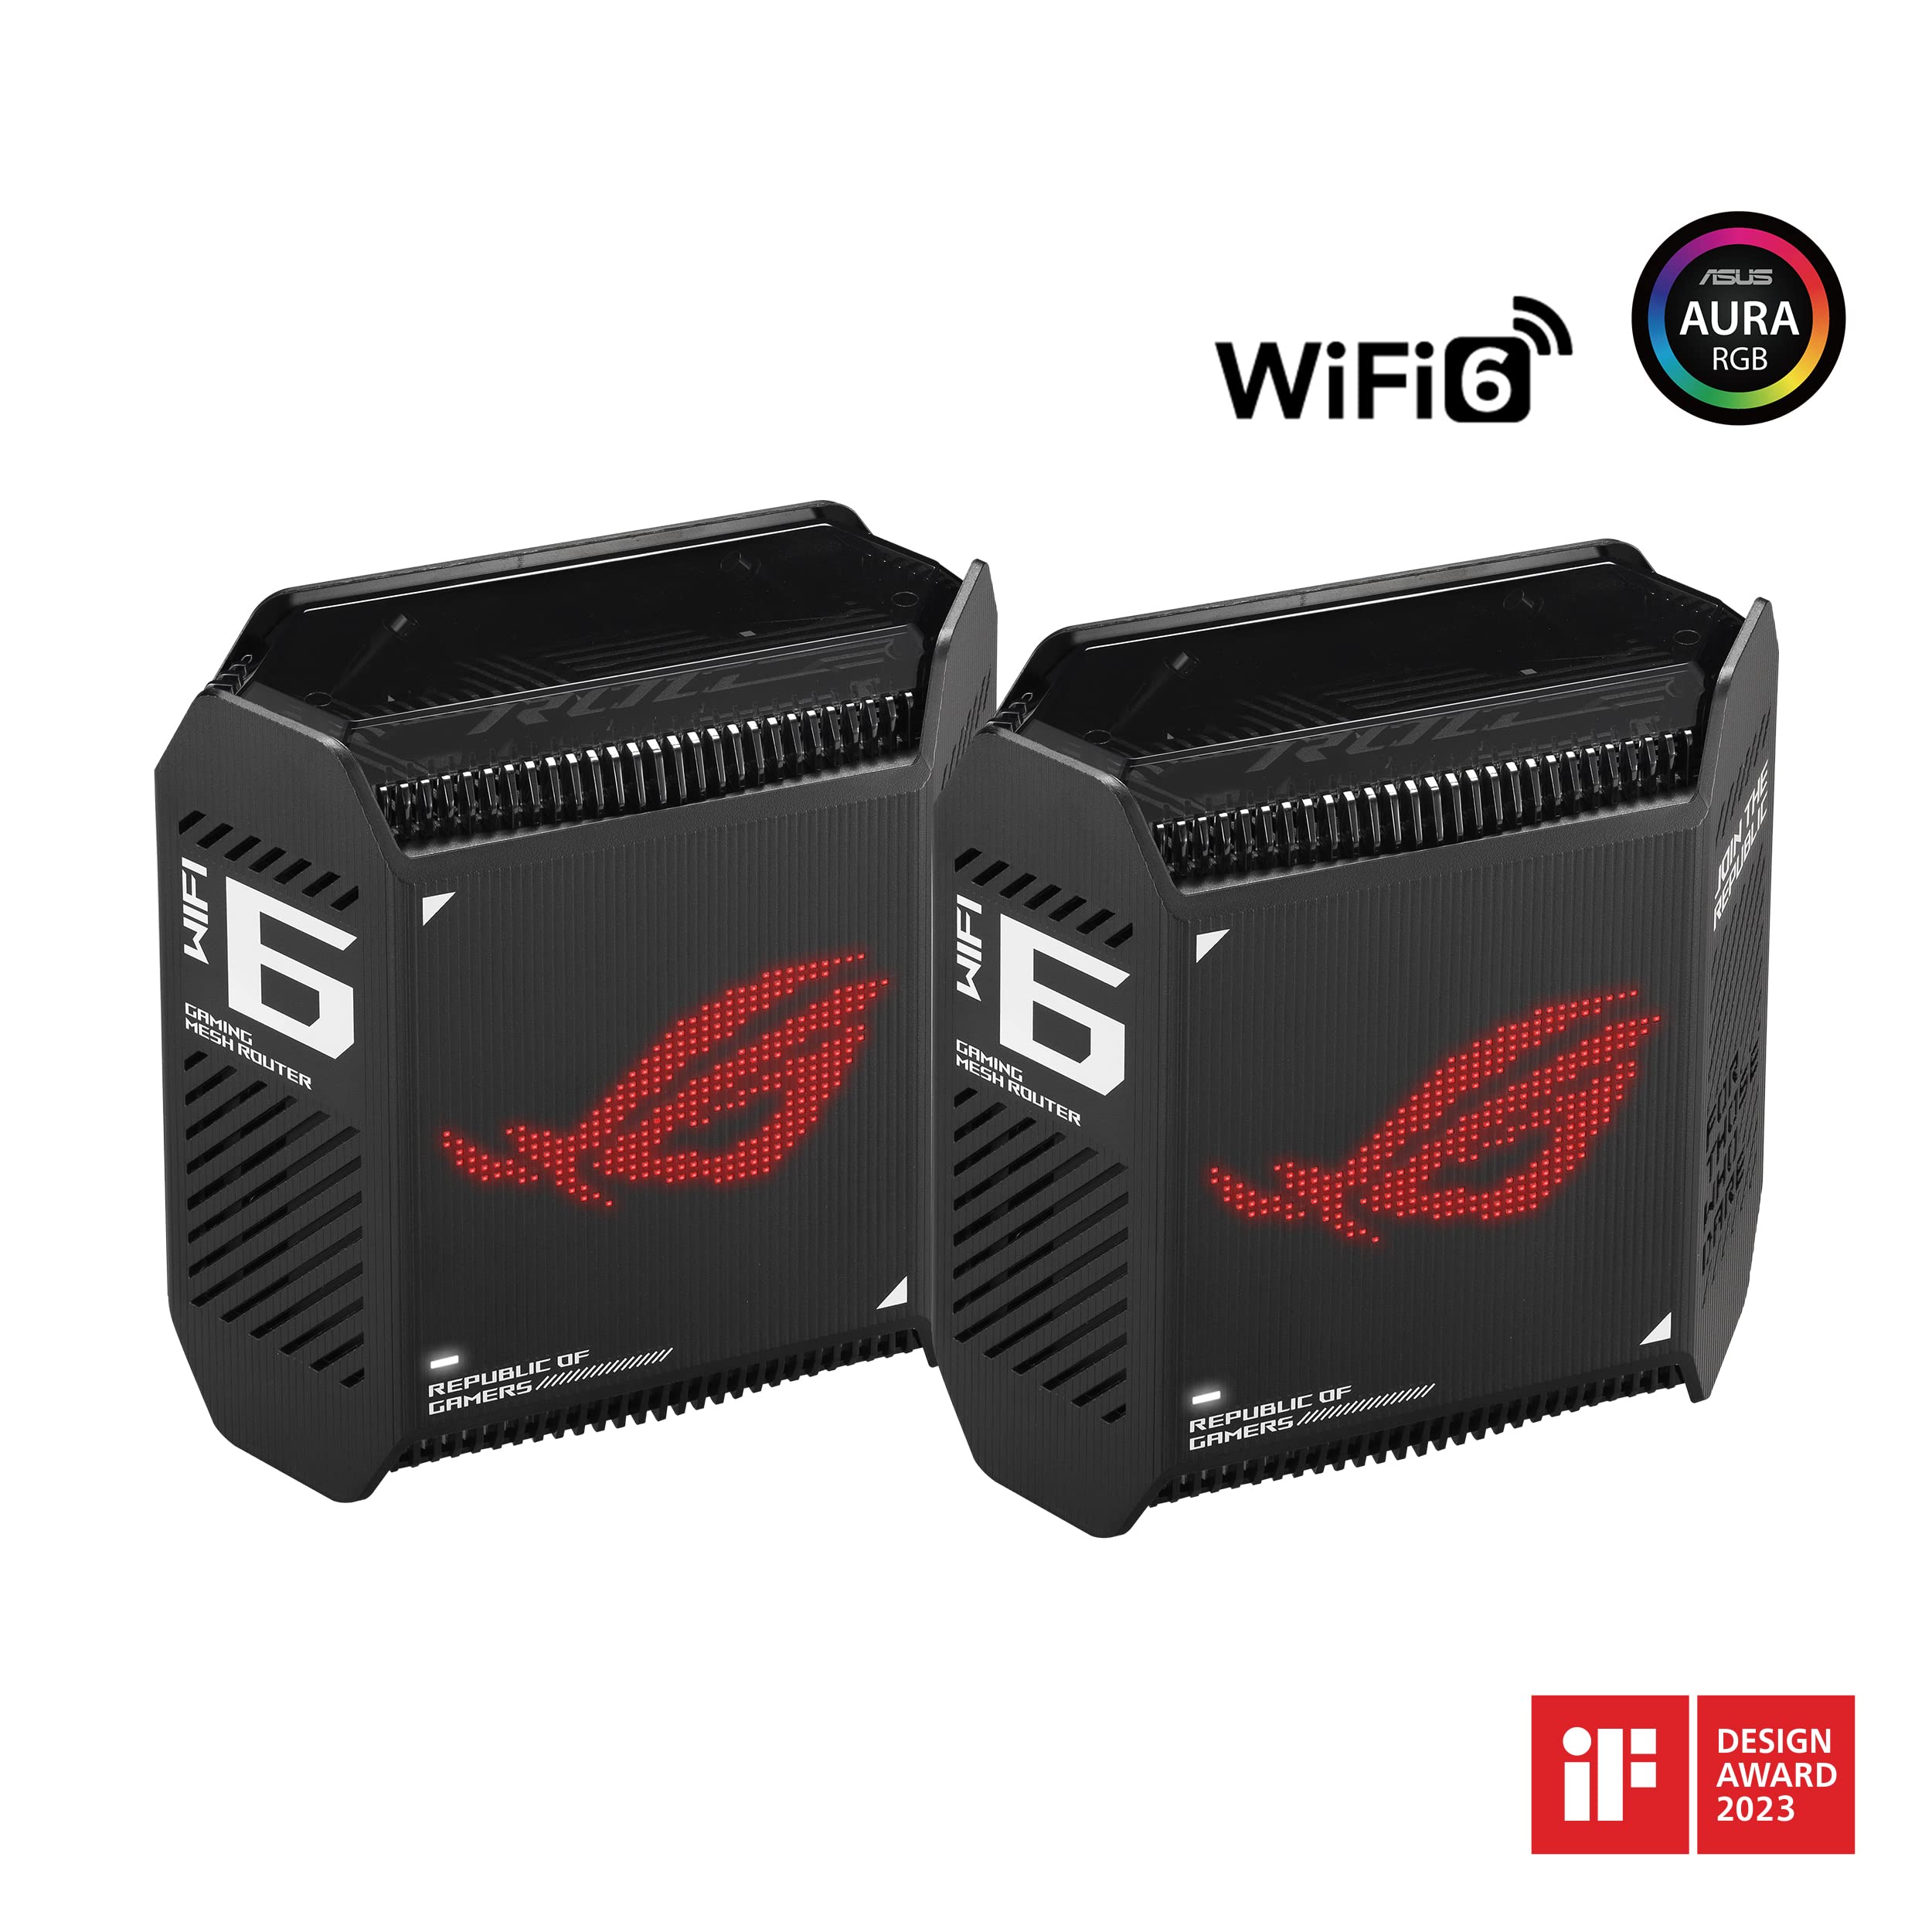 ASUS ROG Rapture GT6 (2PK) Tri-Band WiFi 6 Gaming Mesh WiFi System, Covers up to 5,800 sq ft, 2.5 Gbps Port, Triple-Level Game Acceleration, UNII 4, Free Lifetime Internet Security, Black